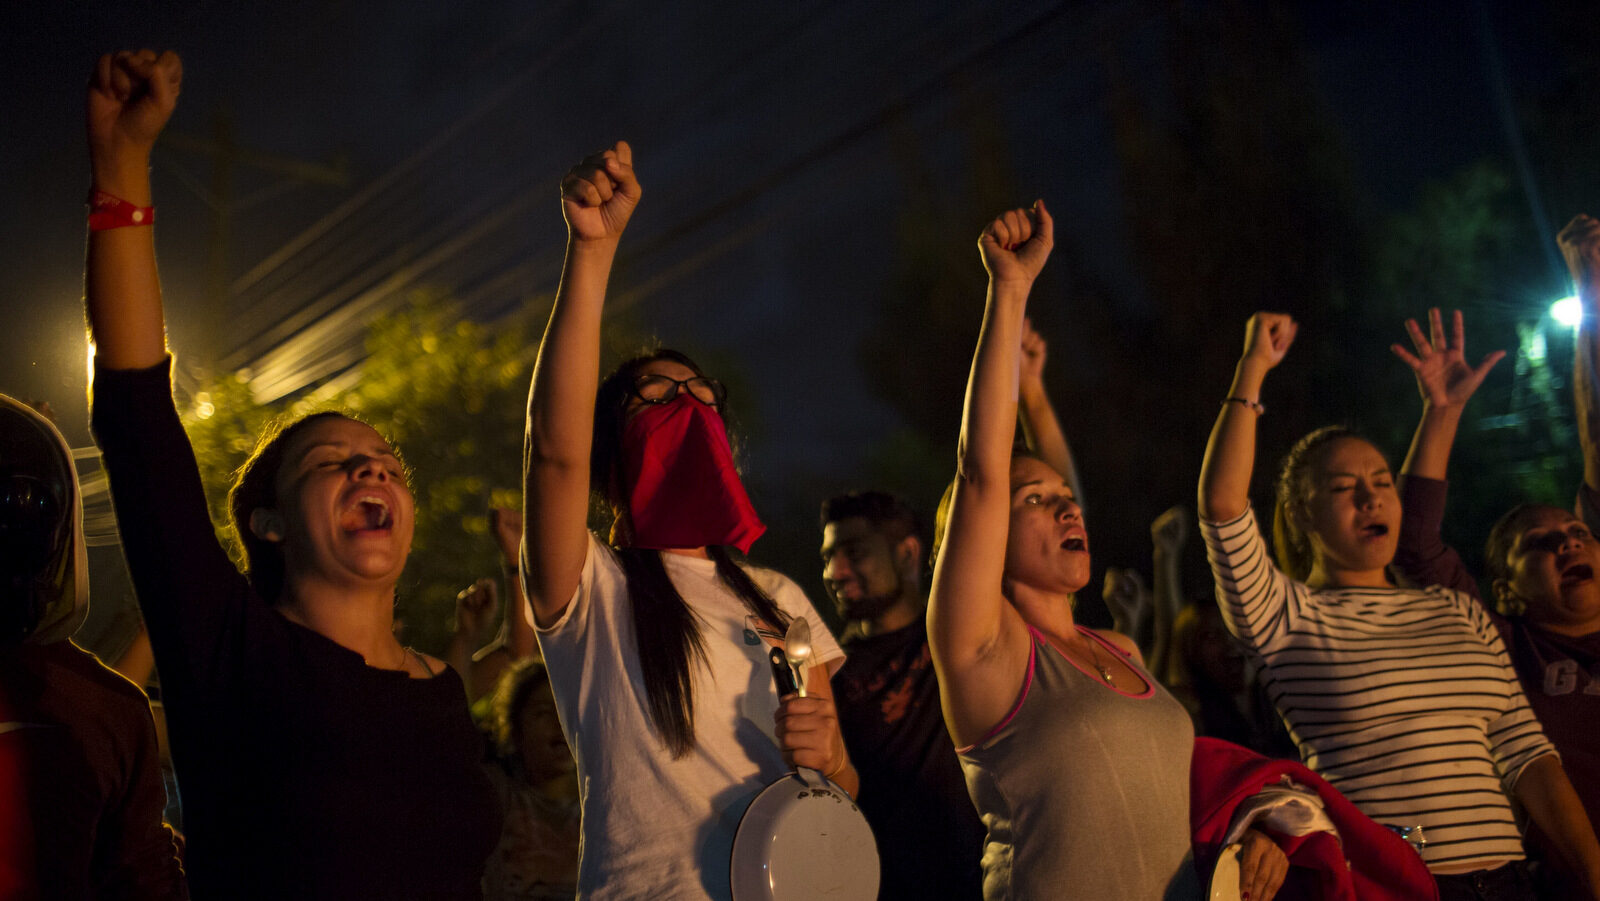 Protestors shout slogans during a government imposed dawn-to-dusk curfew in Tegucigalpa, Honduras, late Sunday, Dec. 3, 2017. Honduran electoral authorities have restarted the long-delayed count of ballots from last weekend's presidential election amid protests by supporters of opposition candidate Salvador Nasralla, who is calling for a re-do of the vote. (AP/Rodrigo Abd)